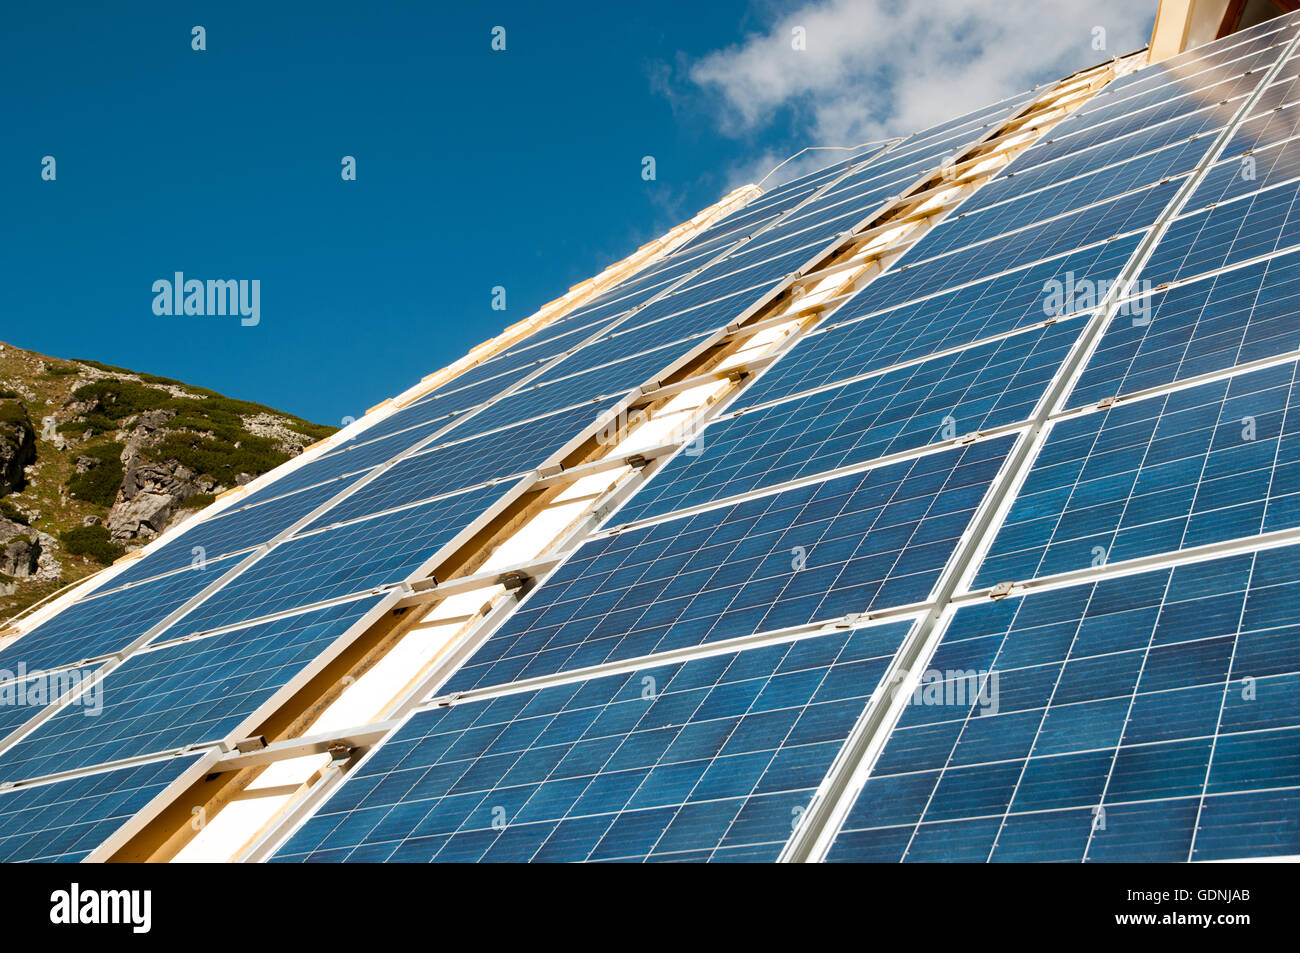 Solar panels on the roof of building Stock Photo